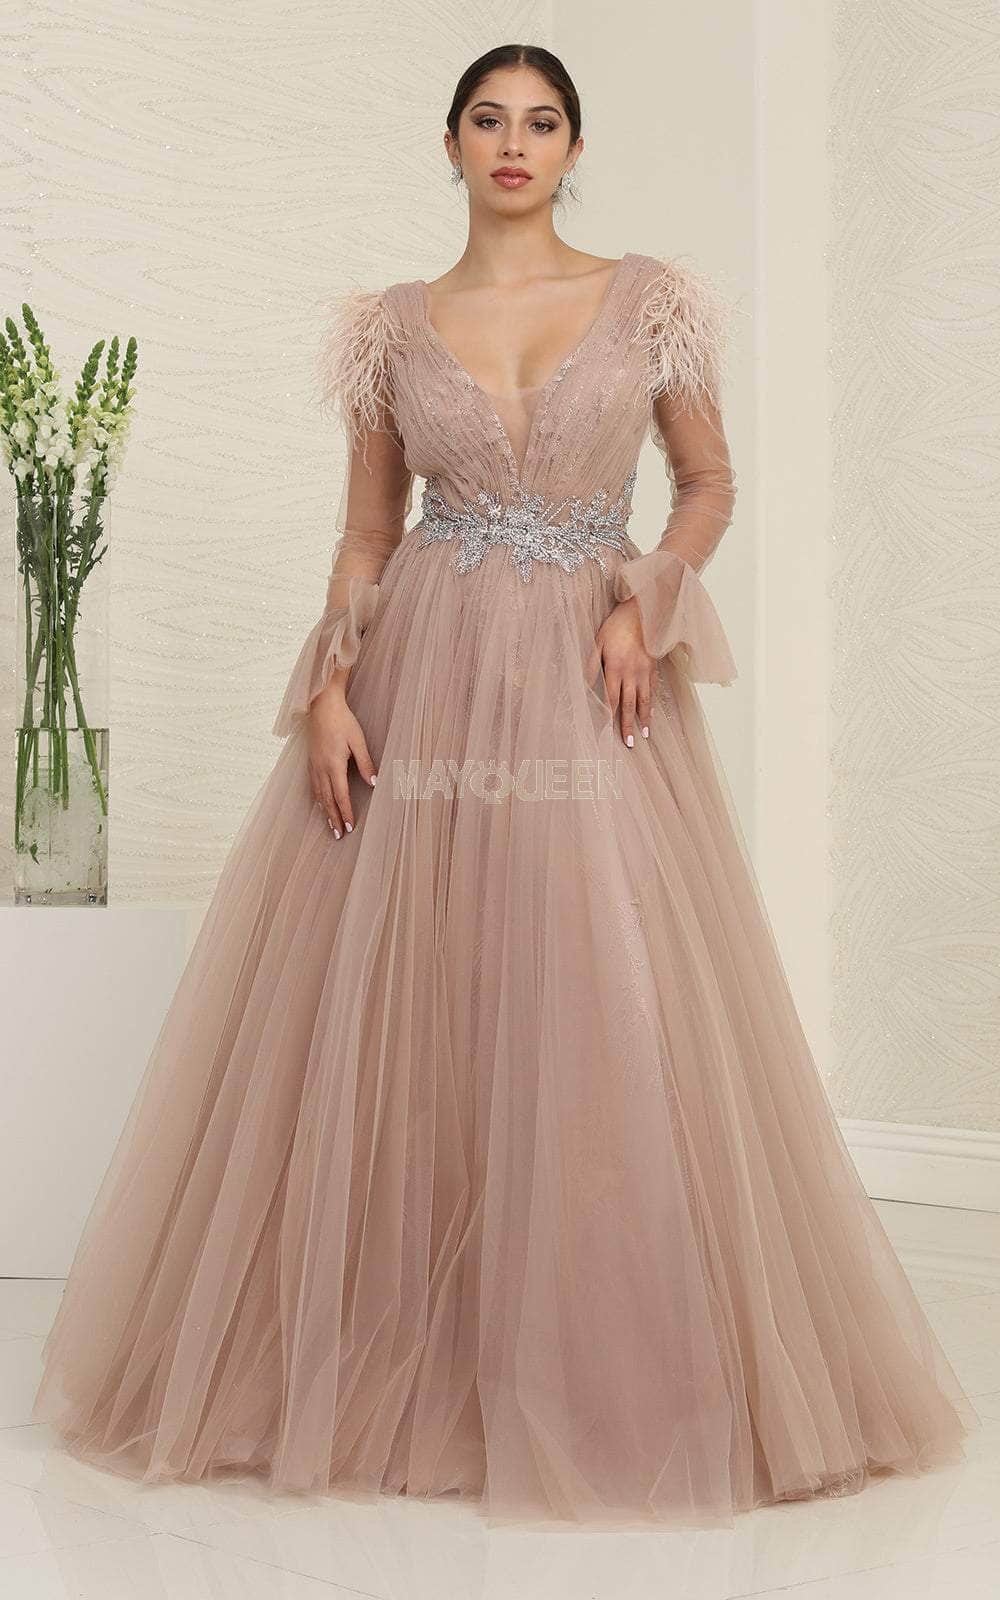 Image of May Queen RQ8096 - Feathered Tulle Evening Dress